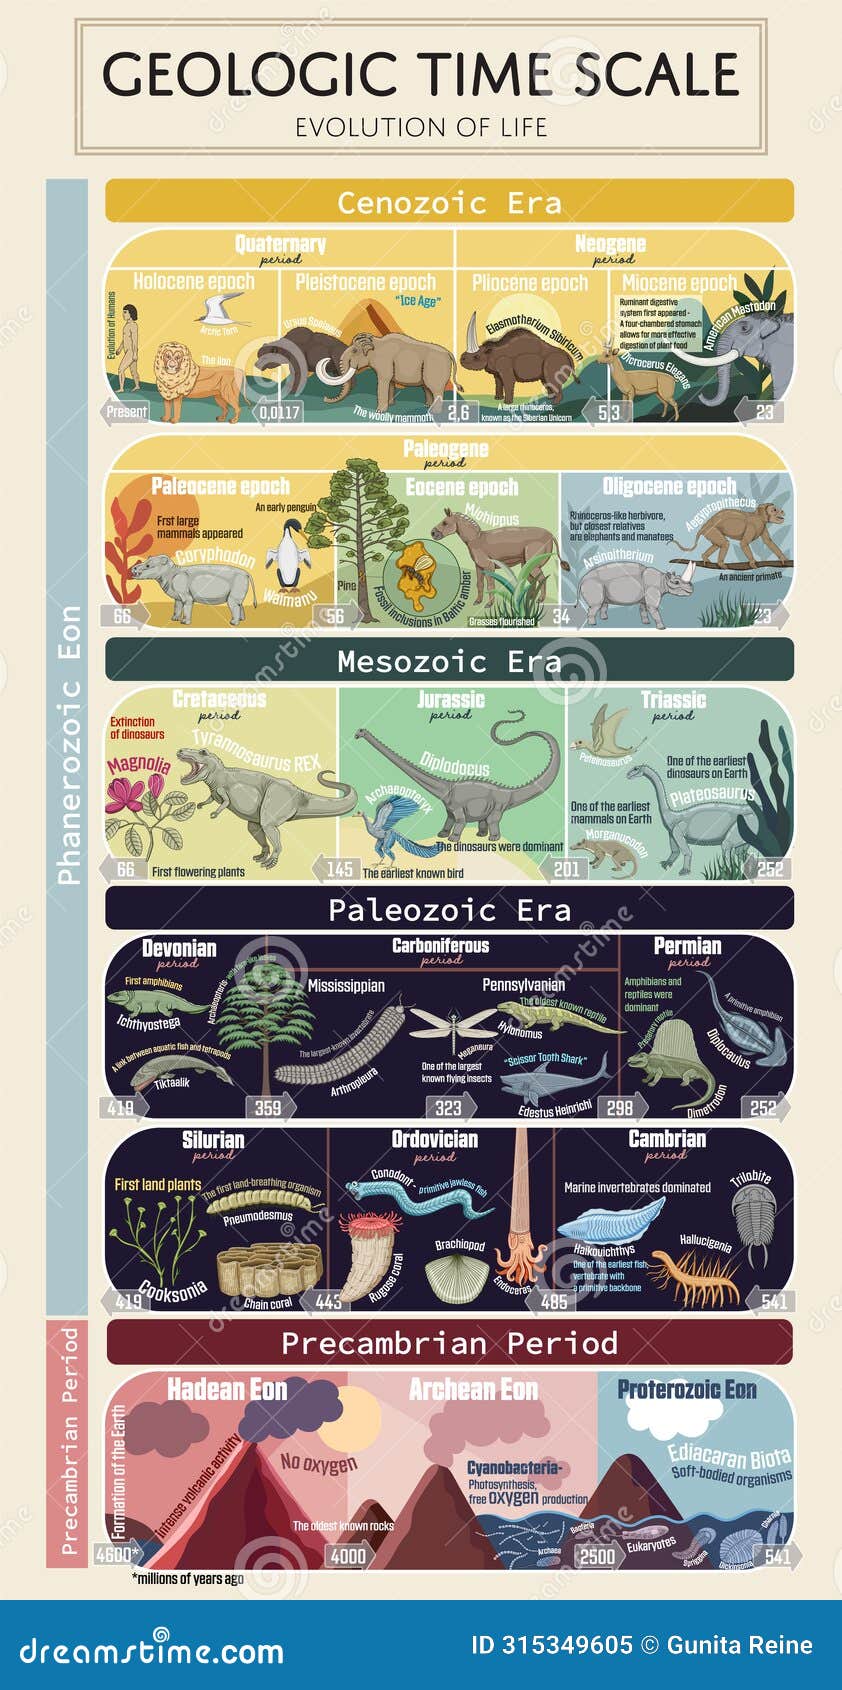 geologic time scale- evolution of life